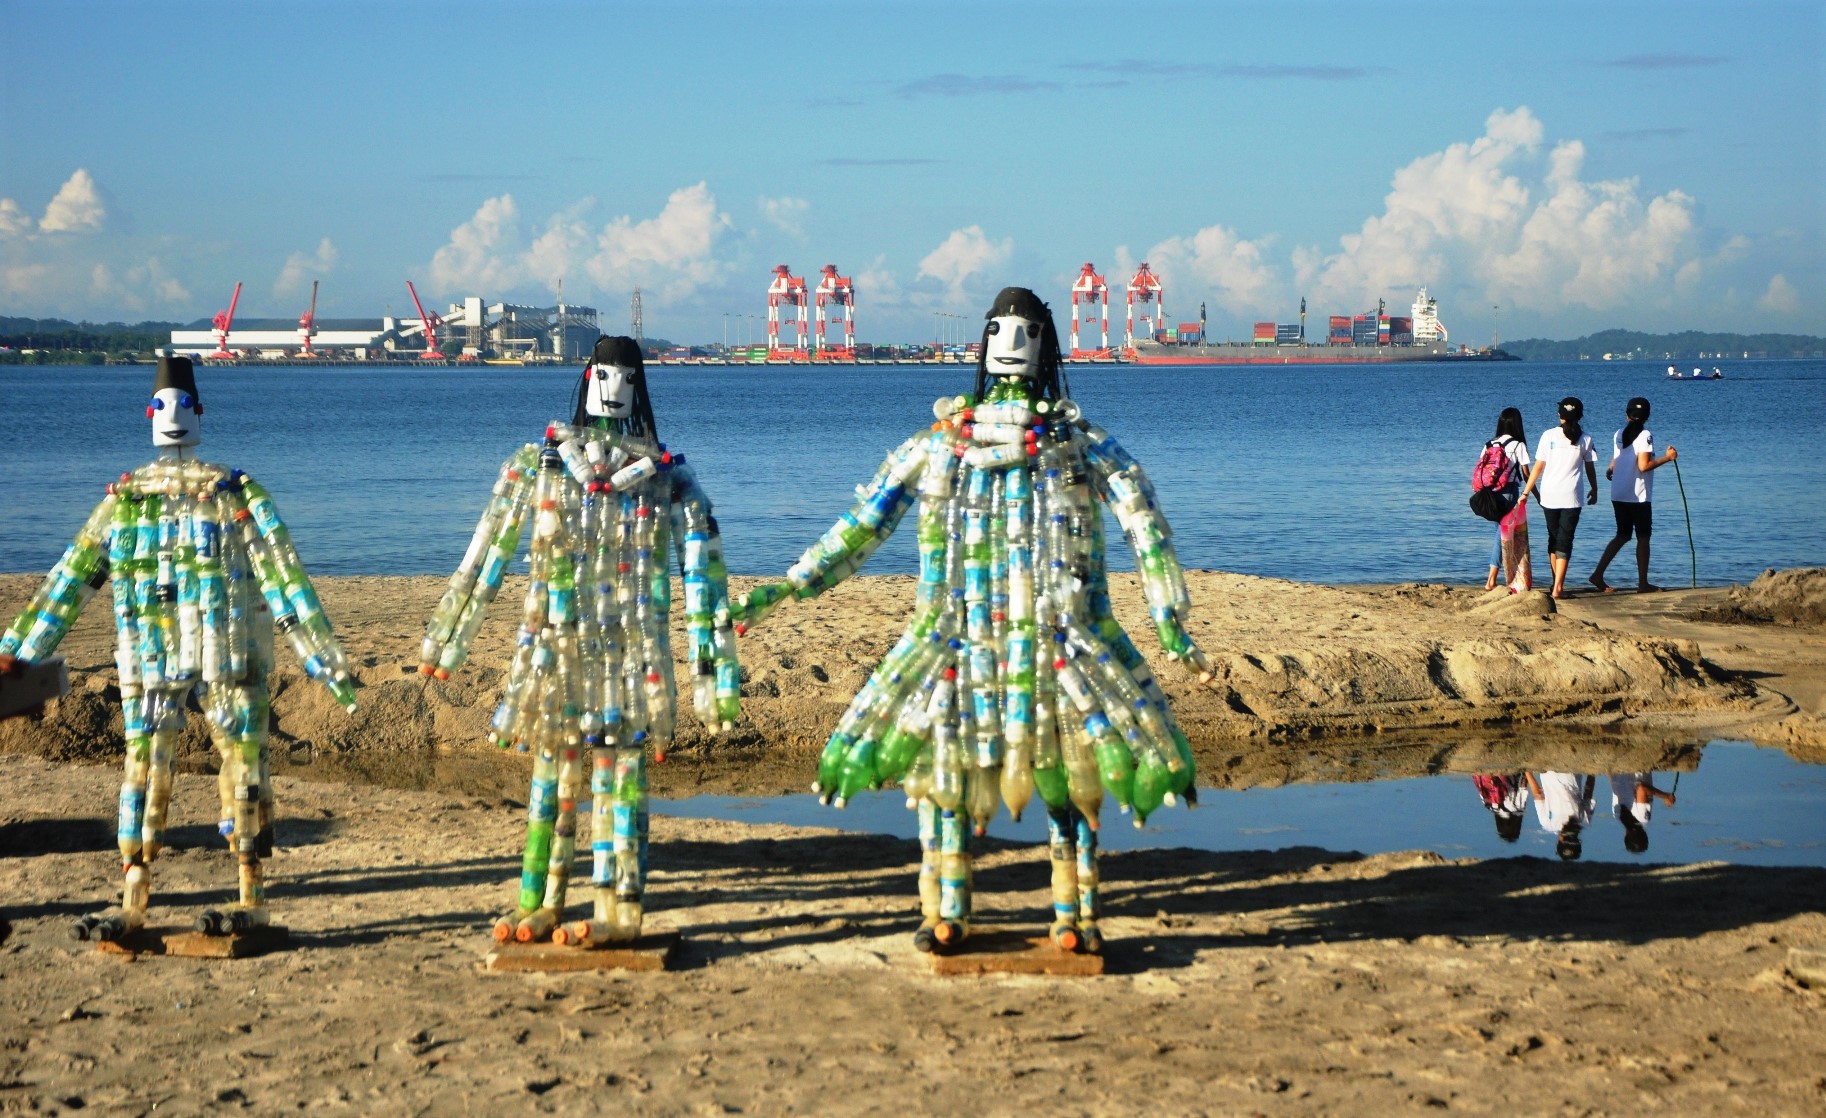 Junk art figures made of recyclable plastic bottles are displayed along the Subic Bay Freeport waterfront in this file photo.